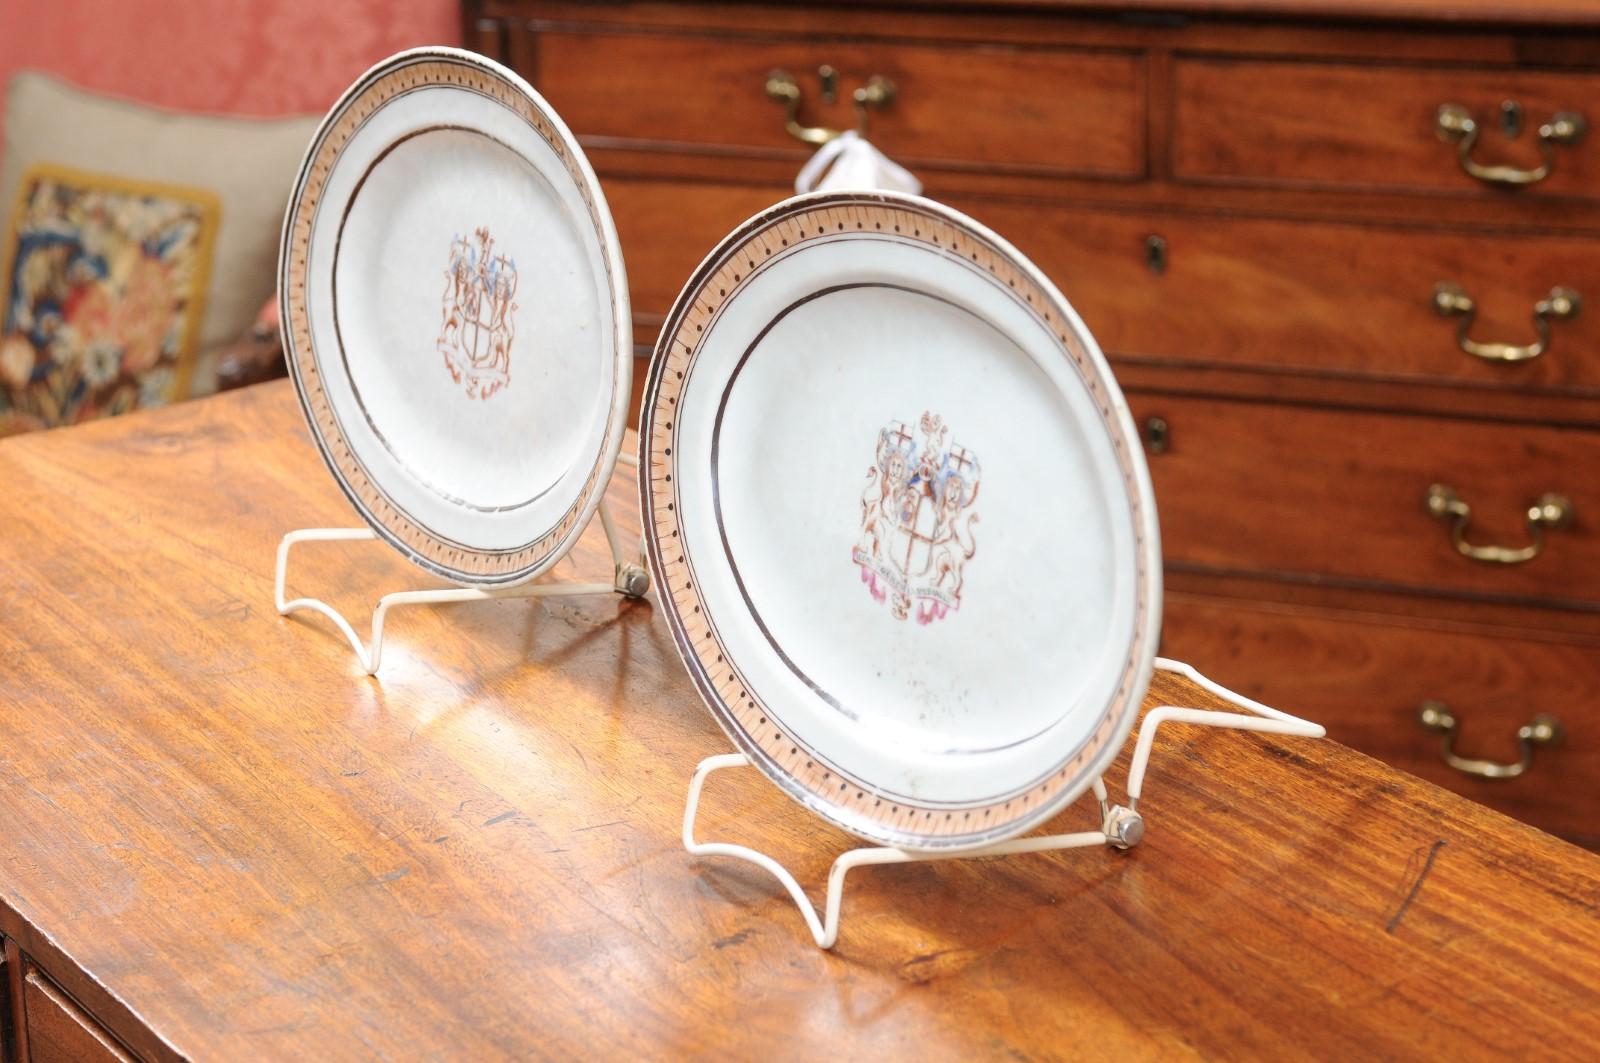 Pair of 18th Century Chinese Export Porcelain Platters with Armorial Crests For Sale 7